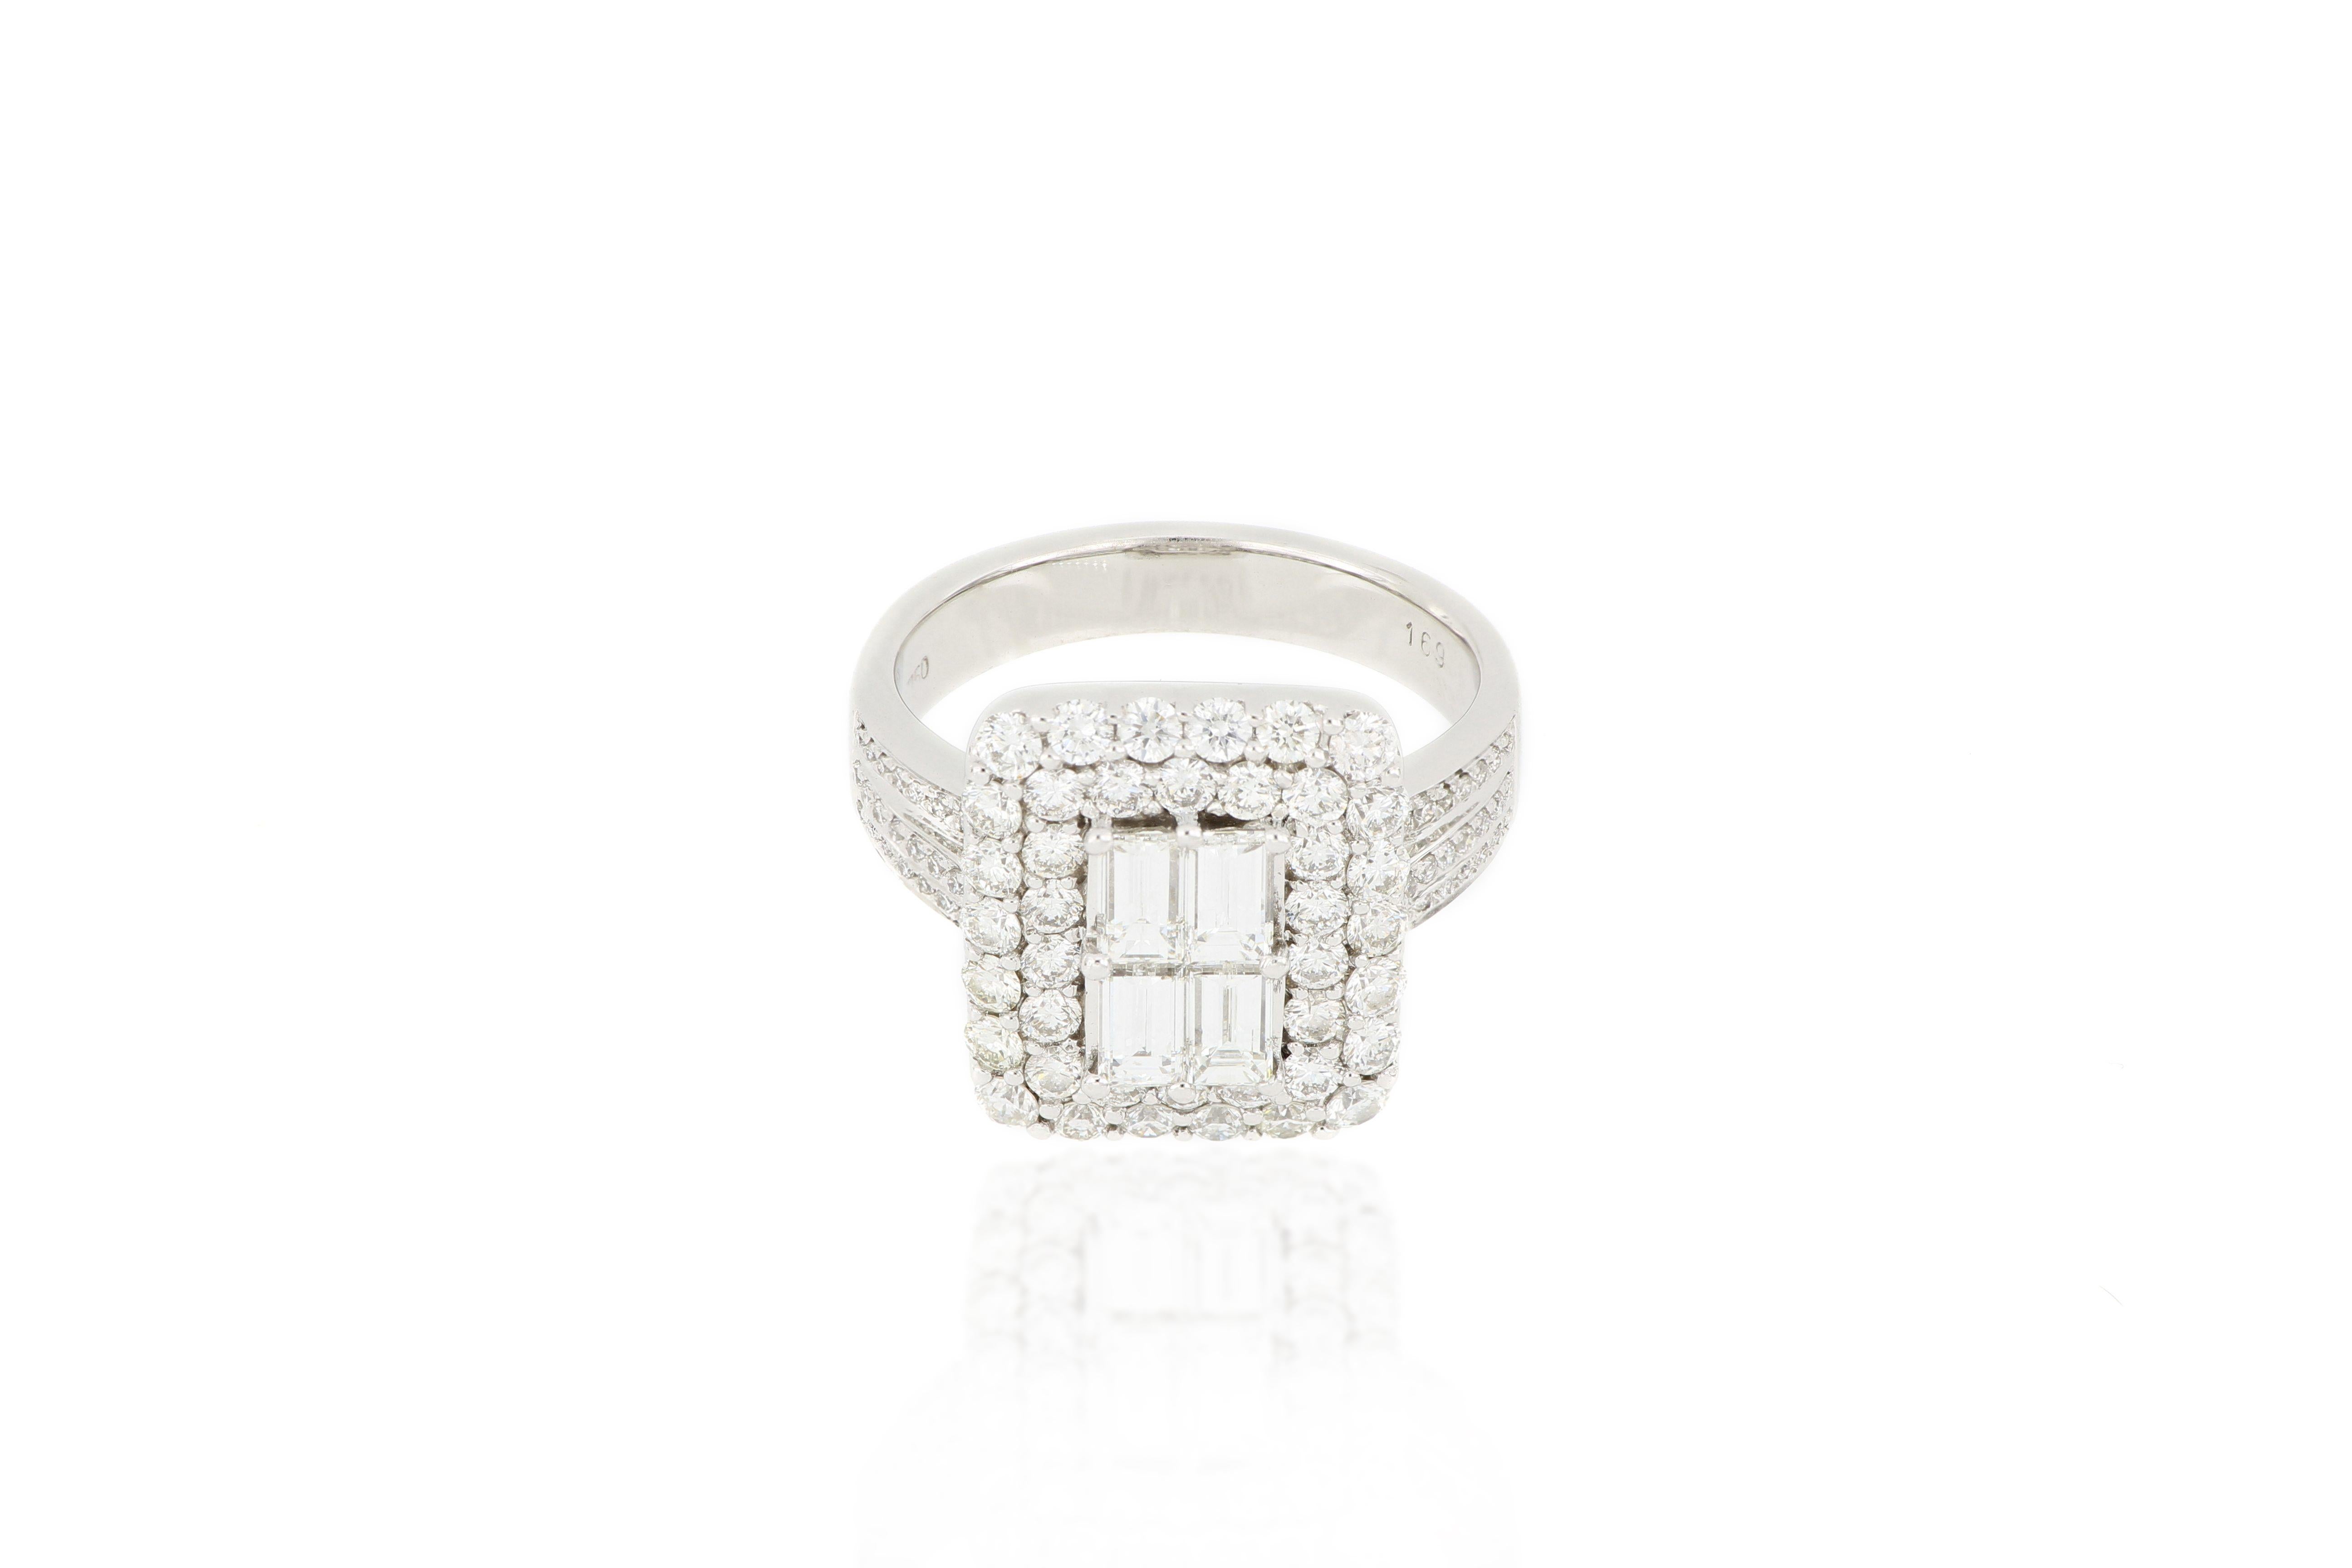 A diamond ring, composed of clusters of baguette and brilliant-cut diamonds weighing 0.75 carats and 1.15 carats respectively, mounted in 18 karat white gold. A very beautiful ring which is glamorous and stylish.
O’Che 1867 is renowned for its high